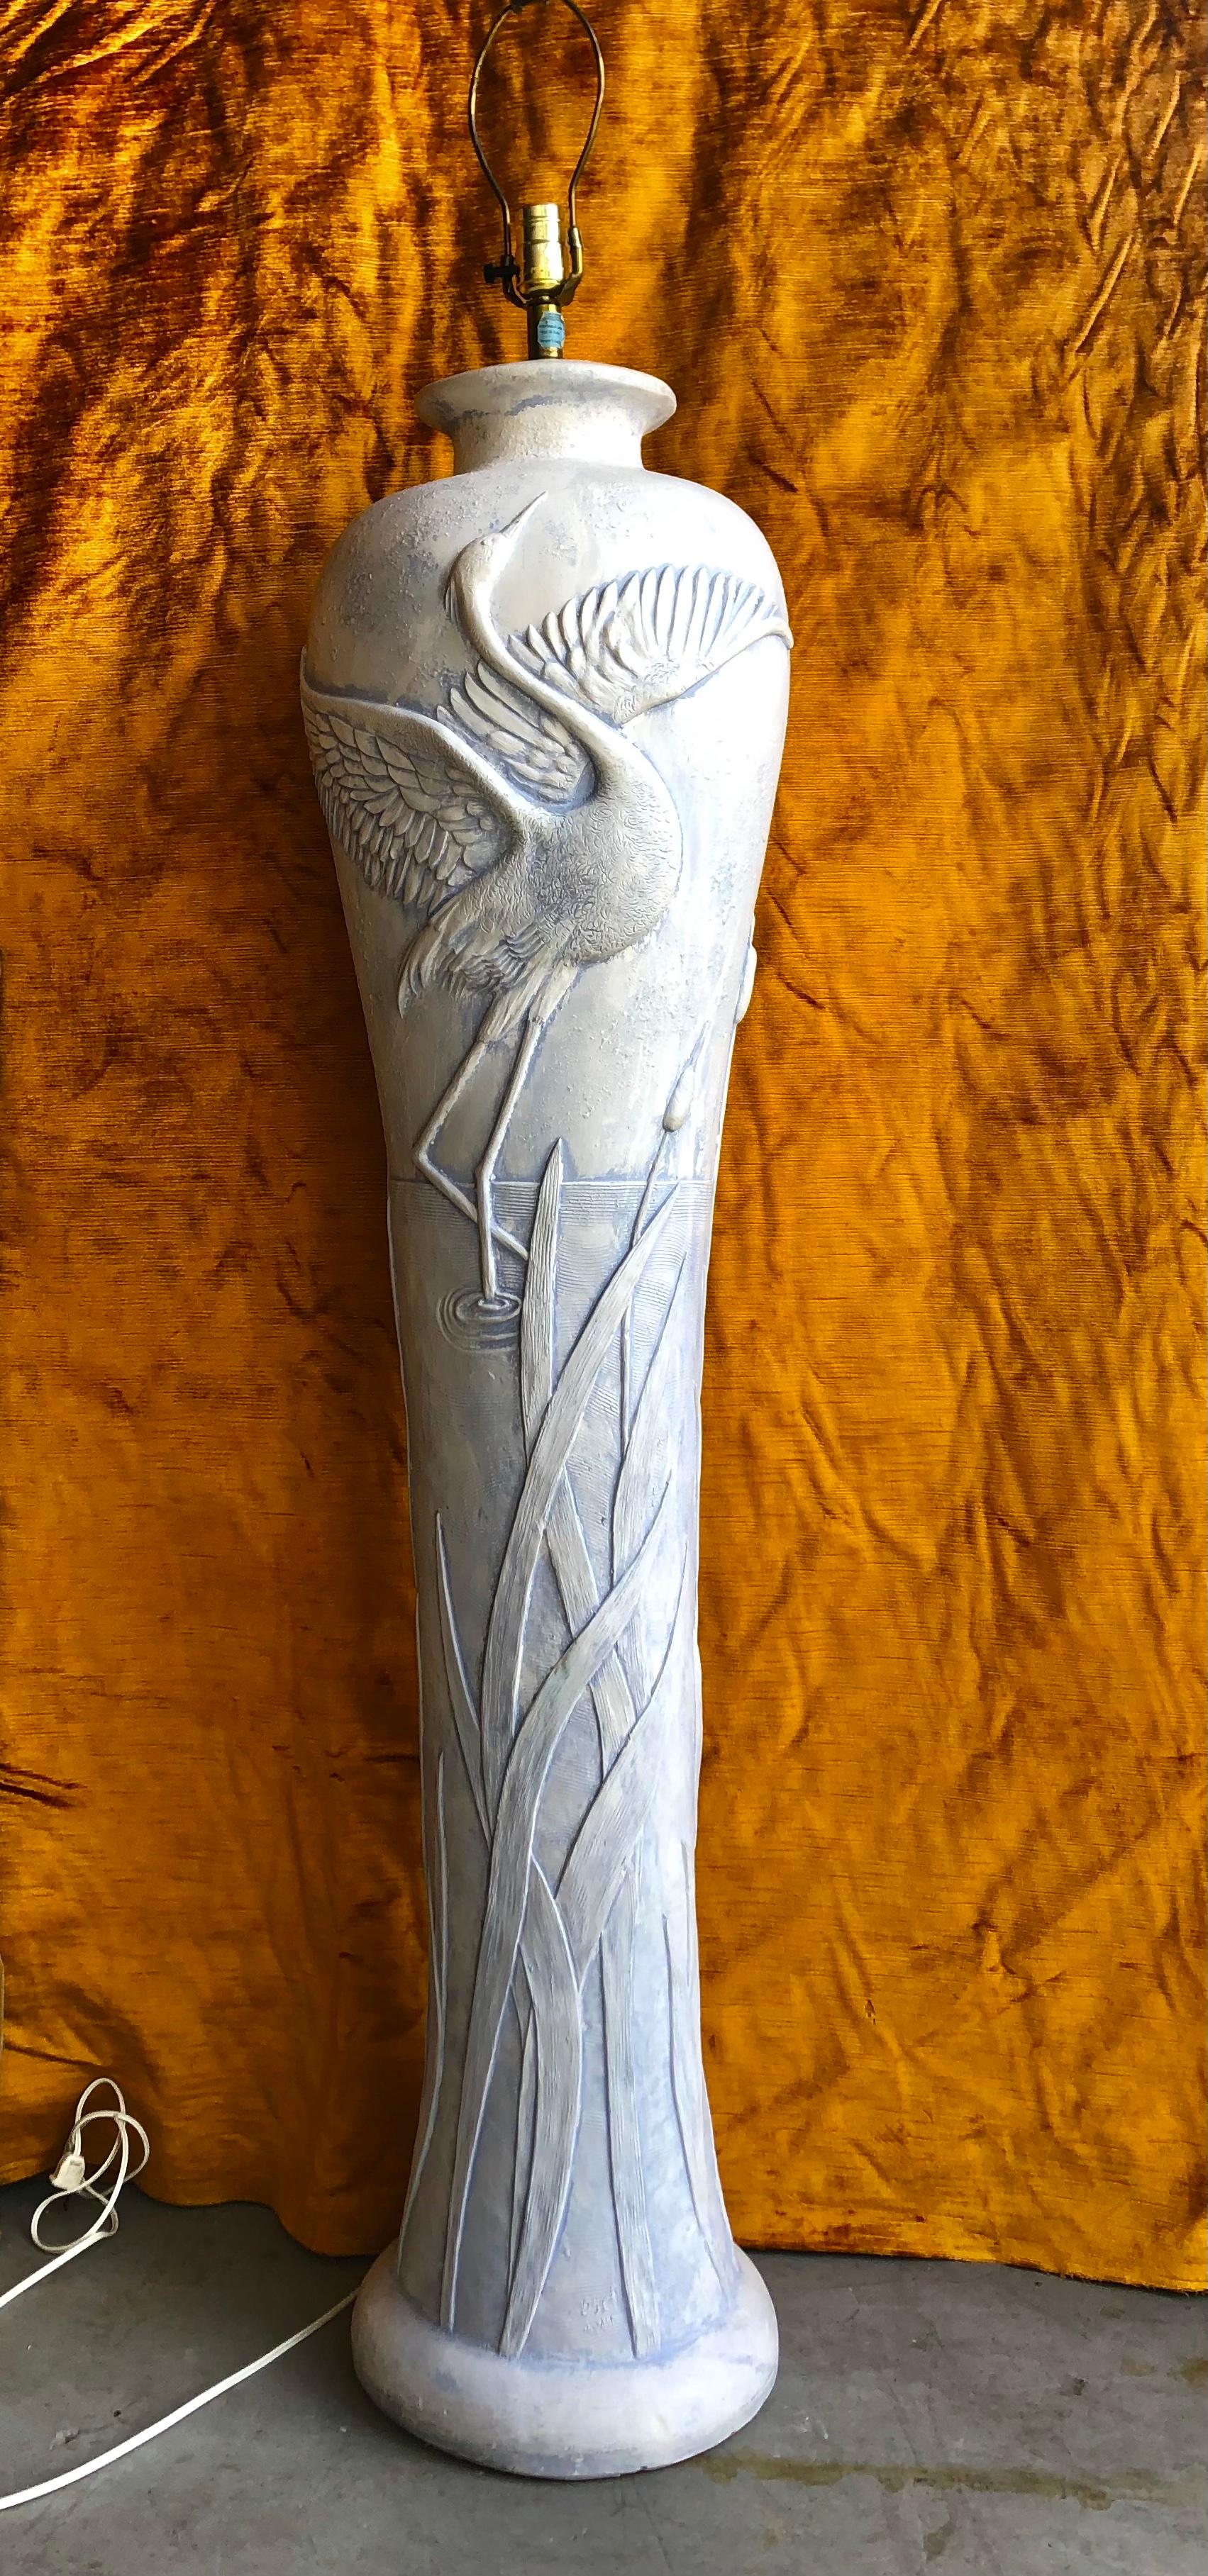 Sculptural Coastal / Hollywood Regency style florida herons plaster three way floor lamp. Circa 1980s.
Hand Signed / Carved by the Artist. 
Features a sculptural molded plaster amphora shaped body with two Florida blue herons and aquatic foliage